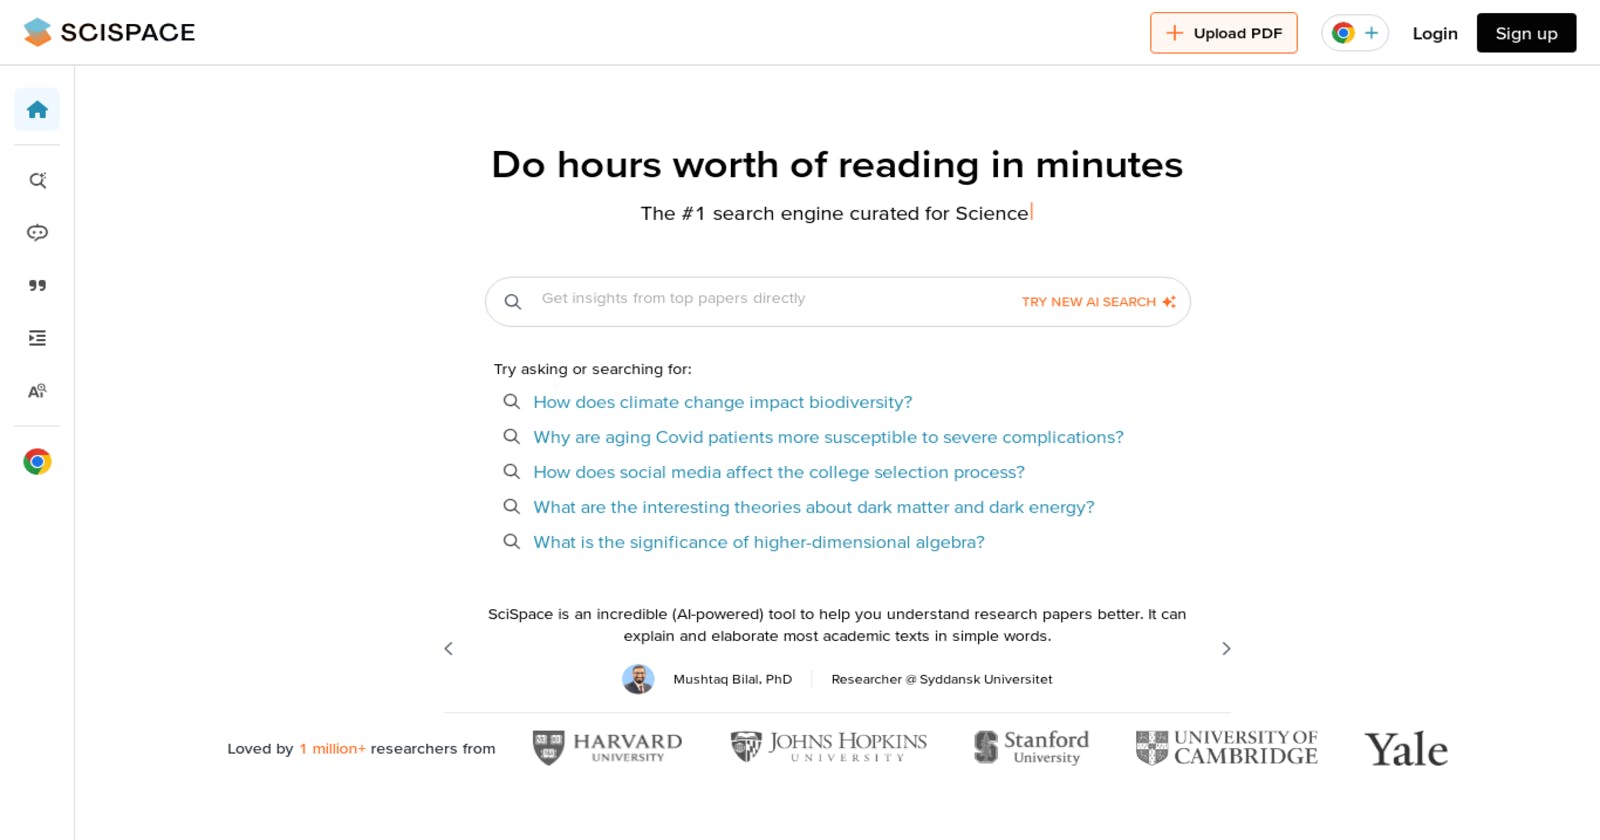 Revolutionize Your Research Experience with SCISPACE: AI-Driven Understanding of Research Papers in Minutes